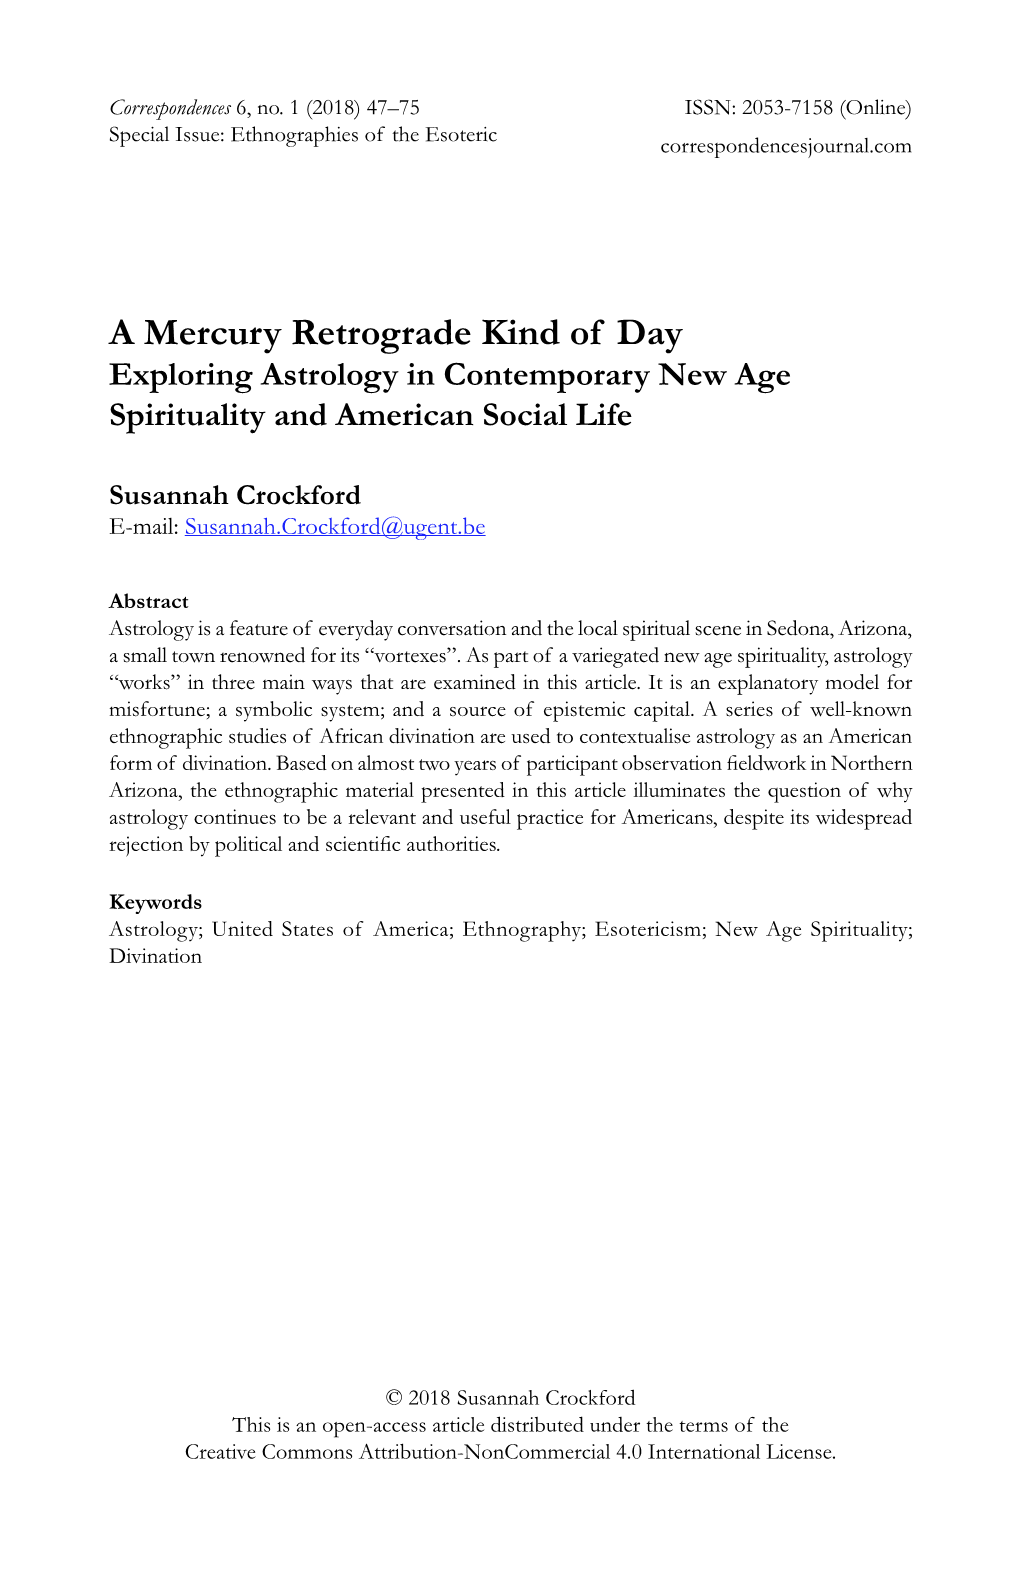 A Mercury Retrograde Kind of Day Exploring Astrology in Contemporary New Age Spirituality and American Social Life